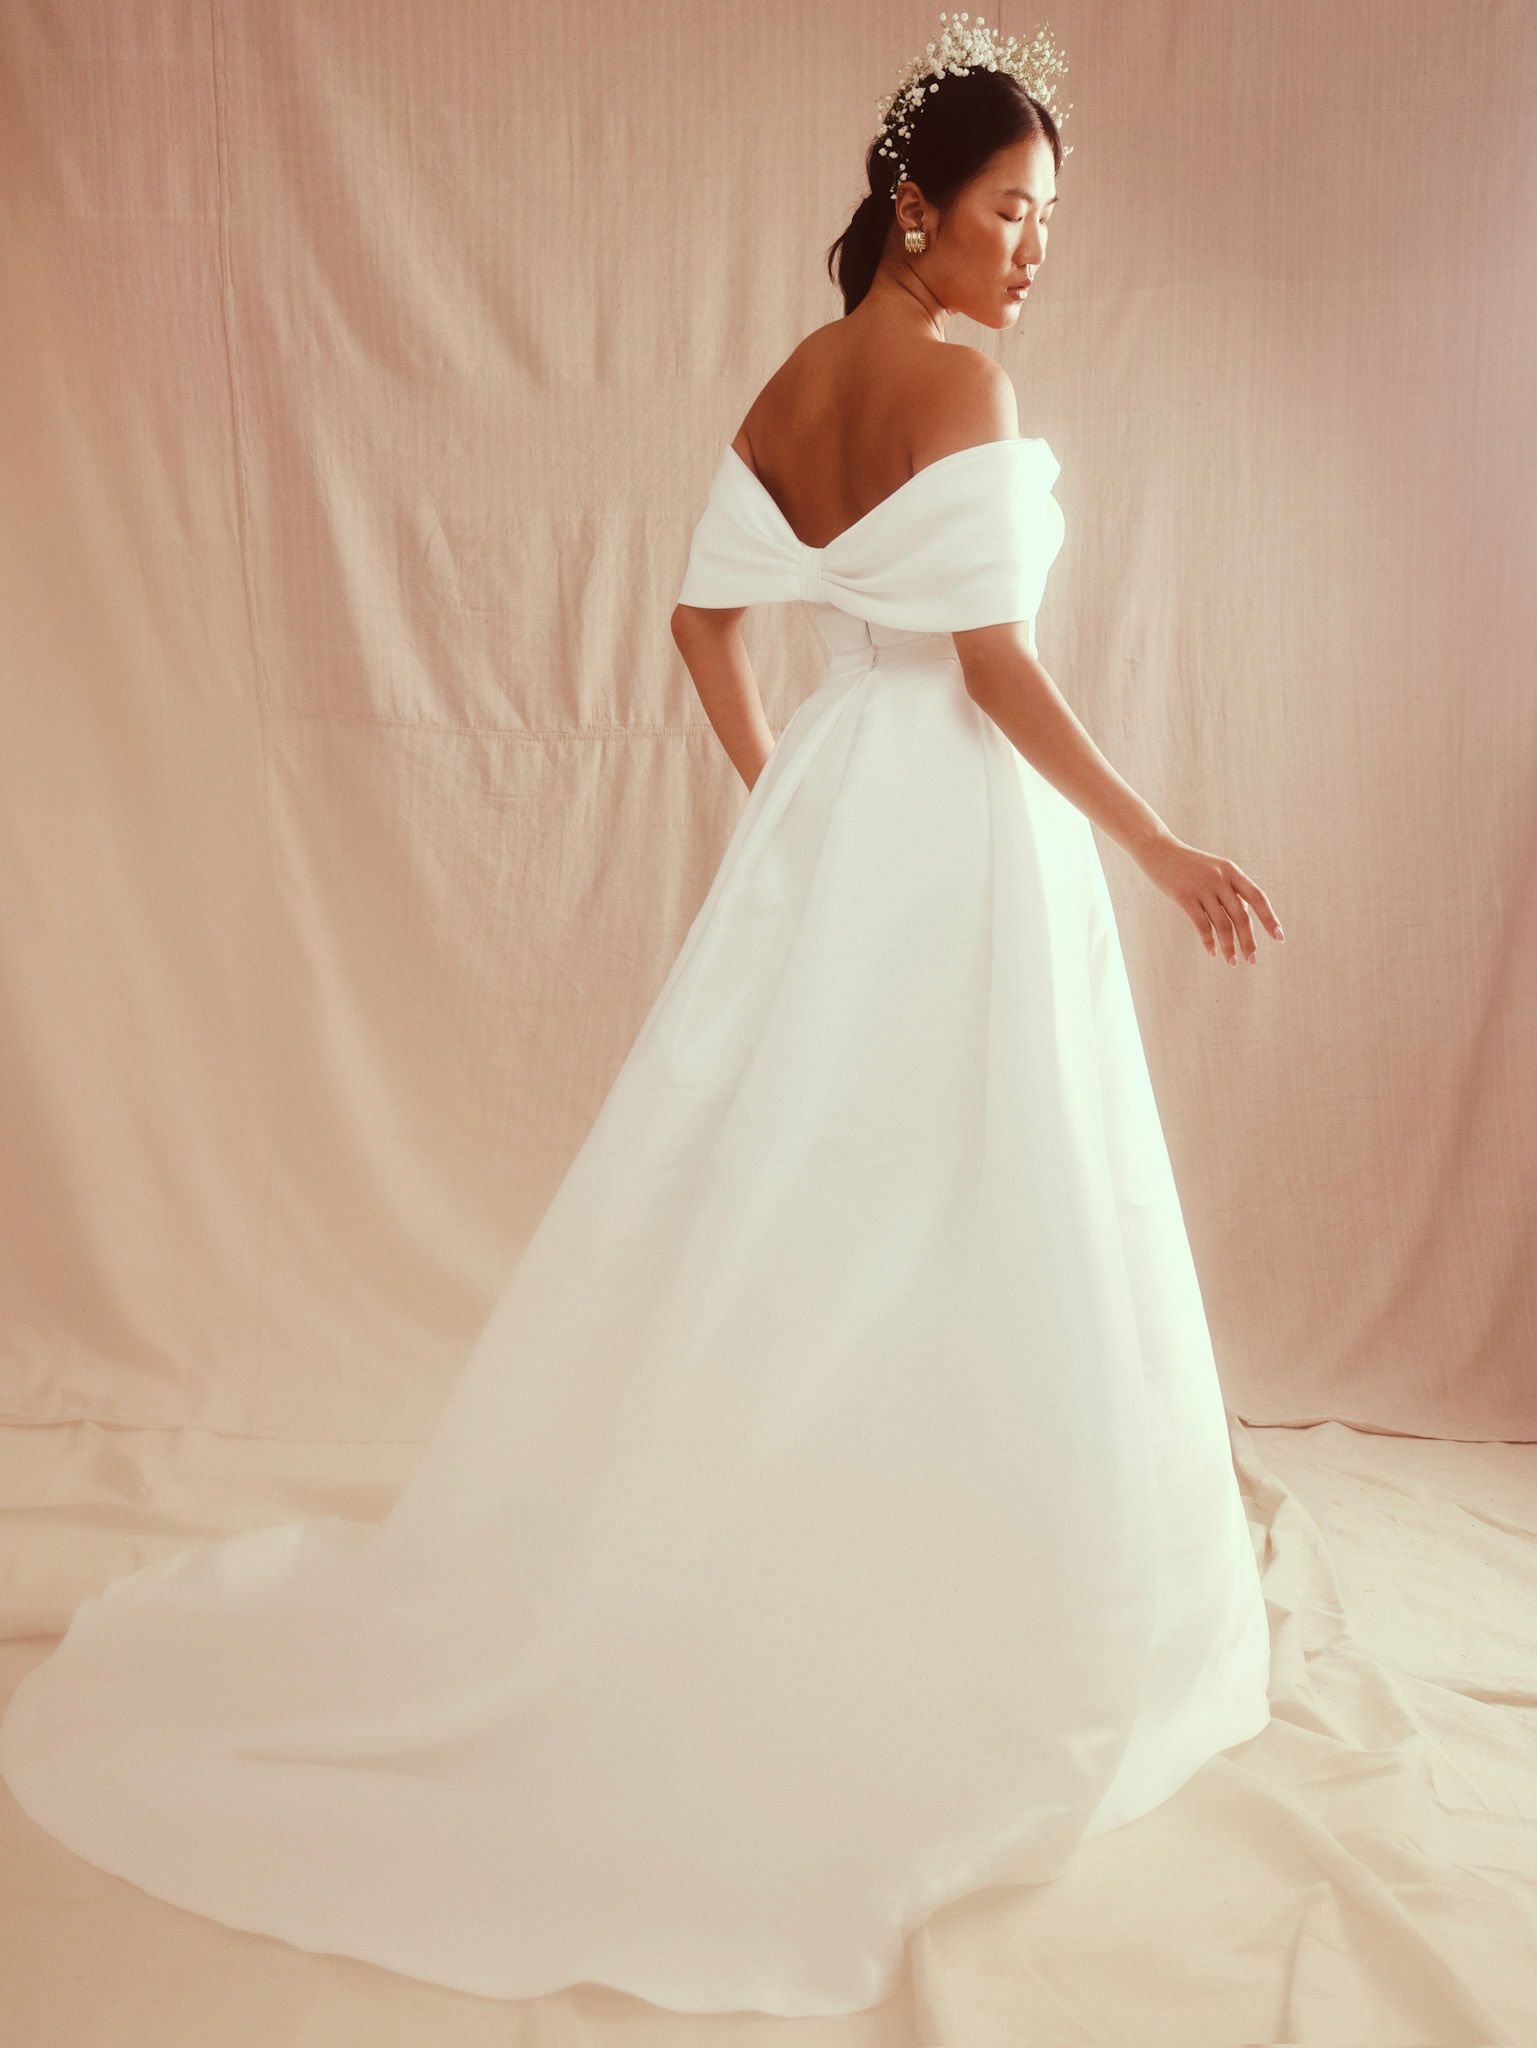 blanc-de-blanc-bridal-boutique-pittsburgh-cleveland-dress-wedding-gown-house-of-renhue-anderson-overskirt-back.jpeg